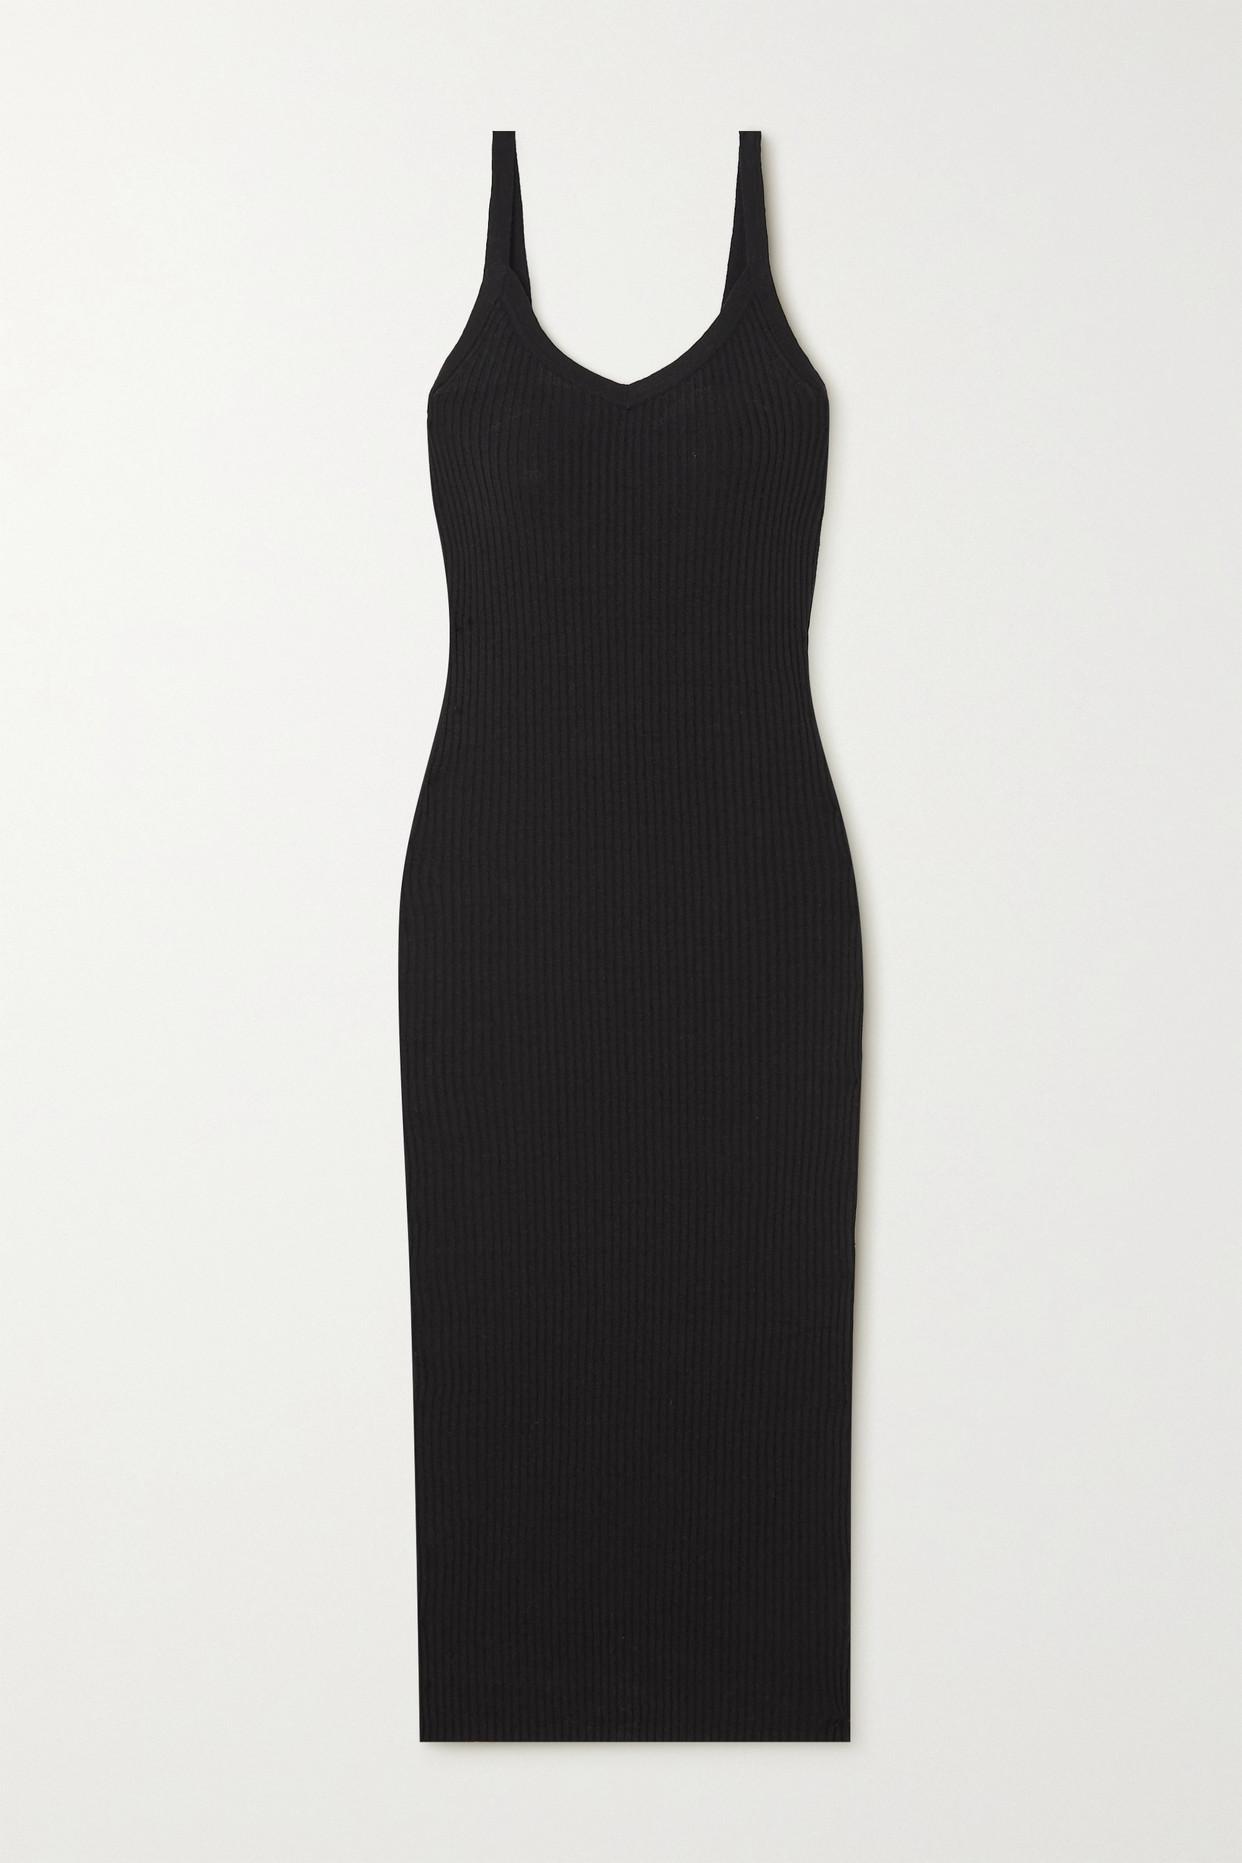 James Perse Ribbed Linen-blend Maxi Dress in Black | Lyst UK